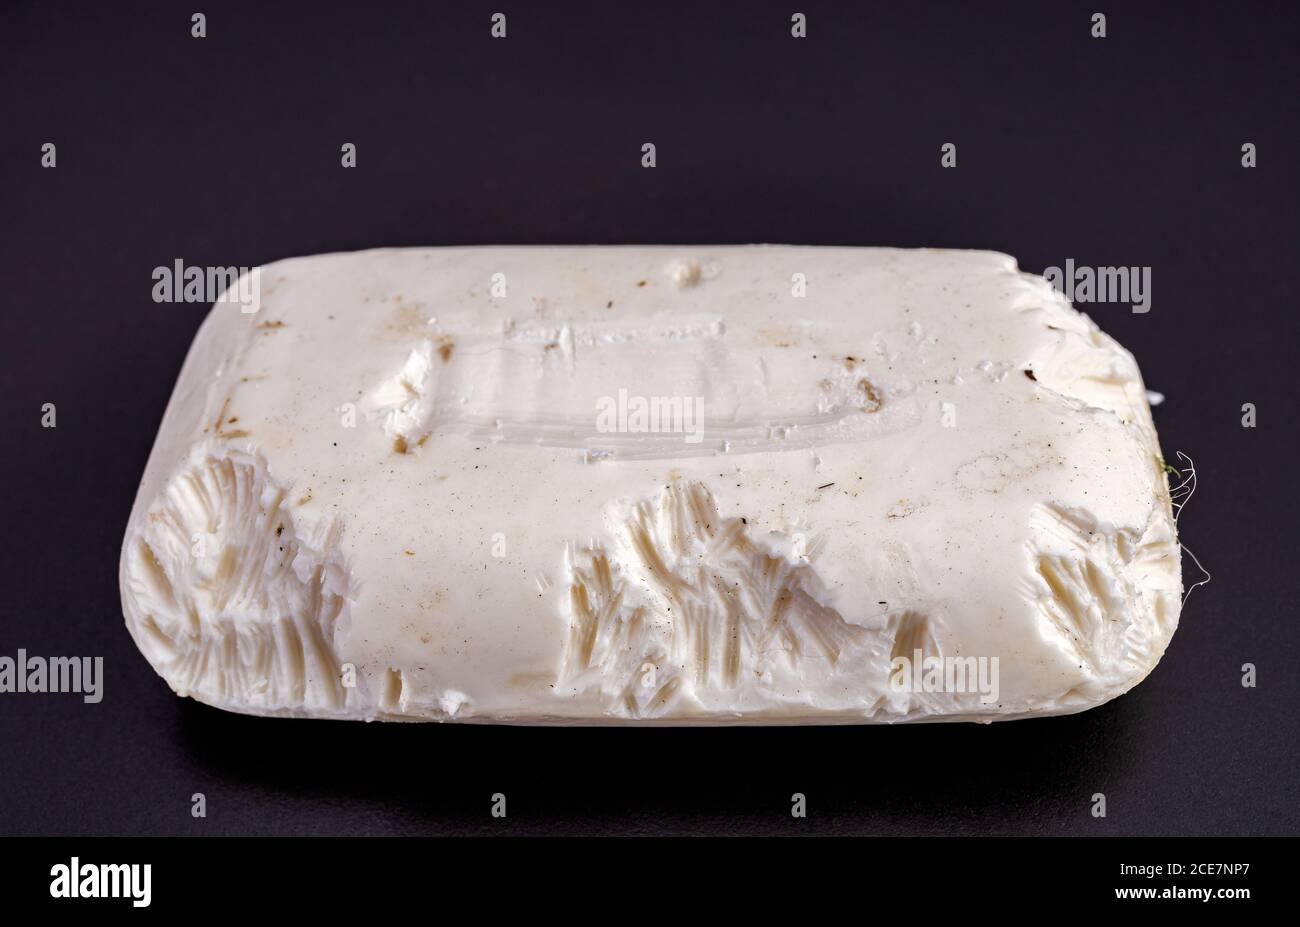 A lot of rodents, rodents and dirt are on this white soap that shouldn't be used.There may be disease on a black background. Stock Photo